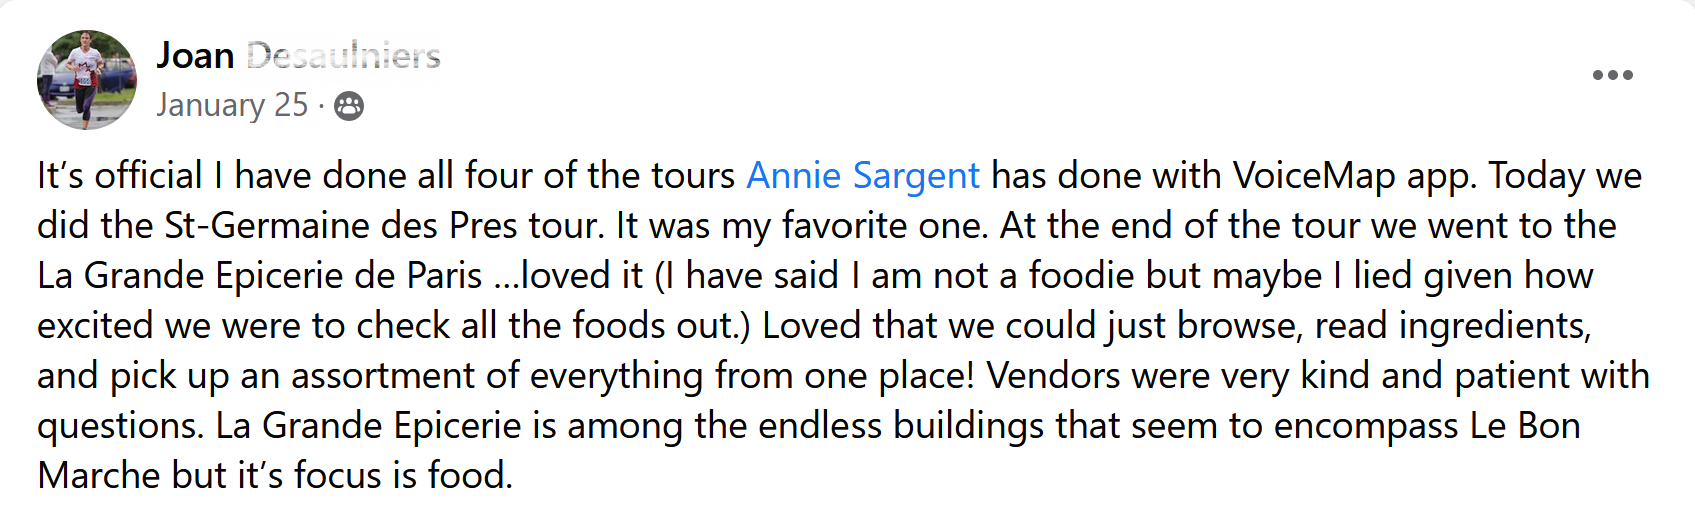 Praise for Annie Sargent's self-guided GPS tours: Joan Desaulniers